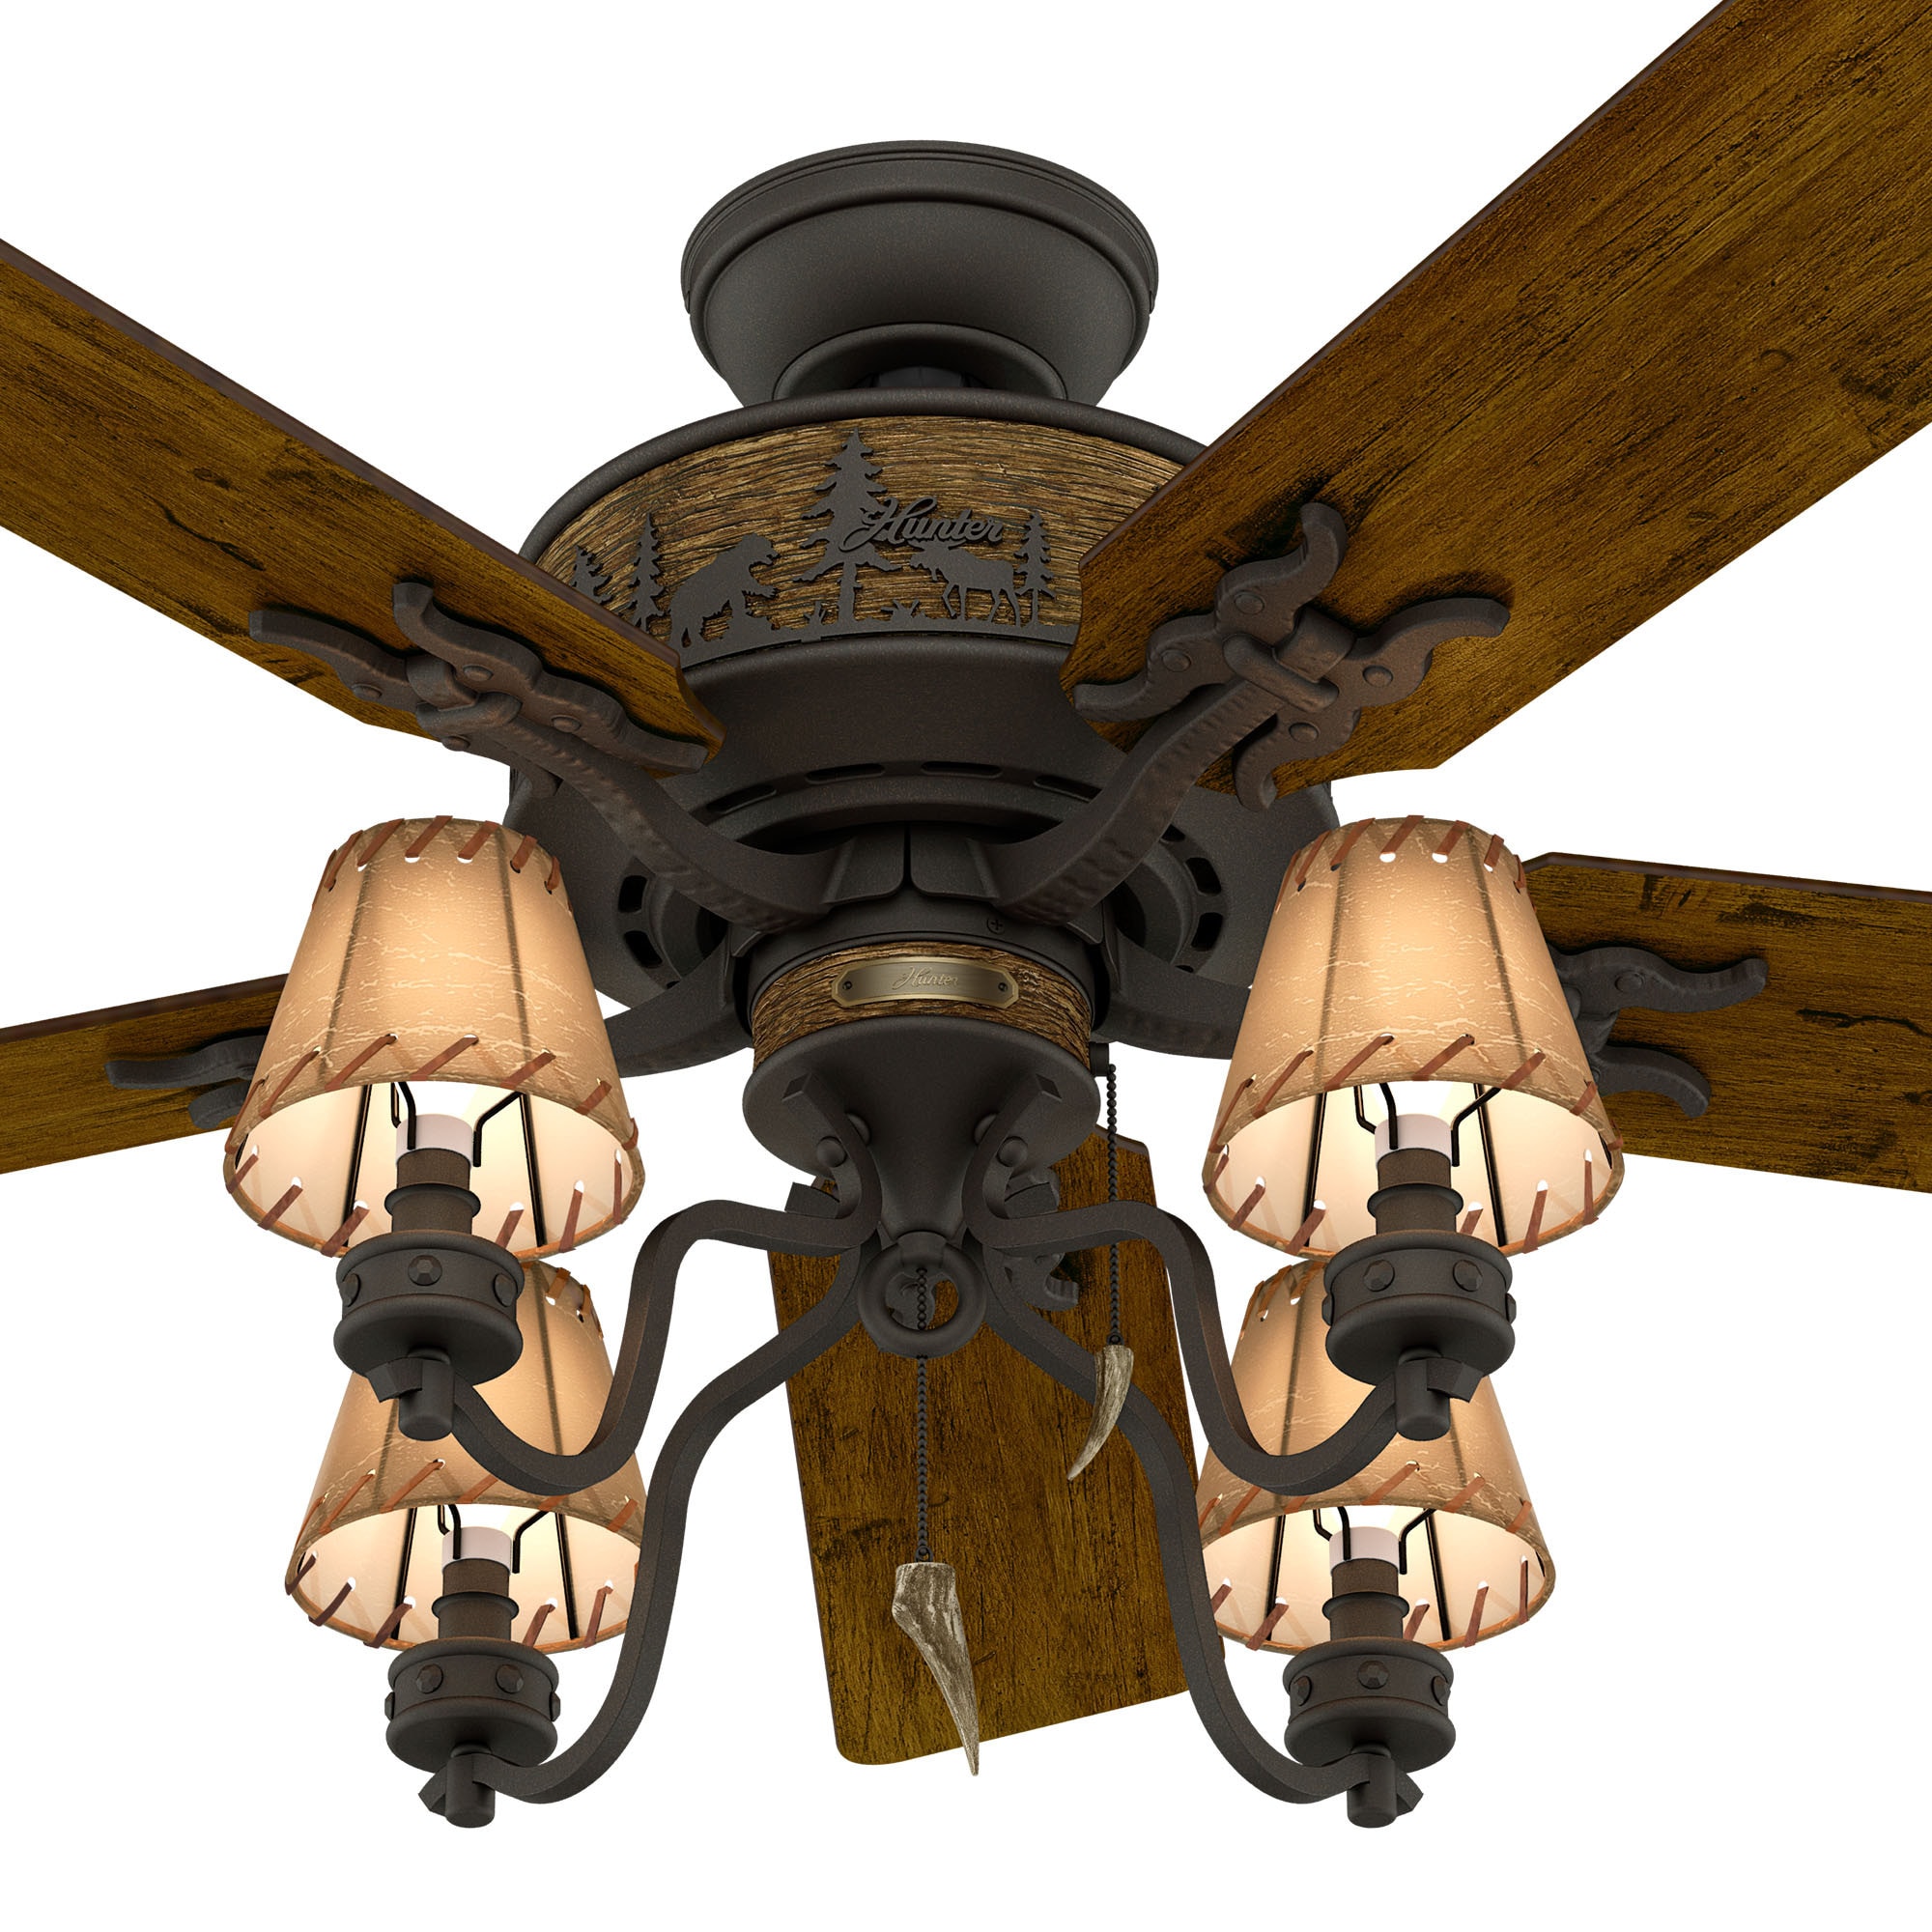 1   HUNTER ADIRONDACK CEILING FAN REPLACEMENT SHADE One